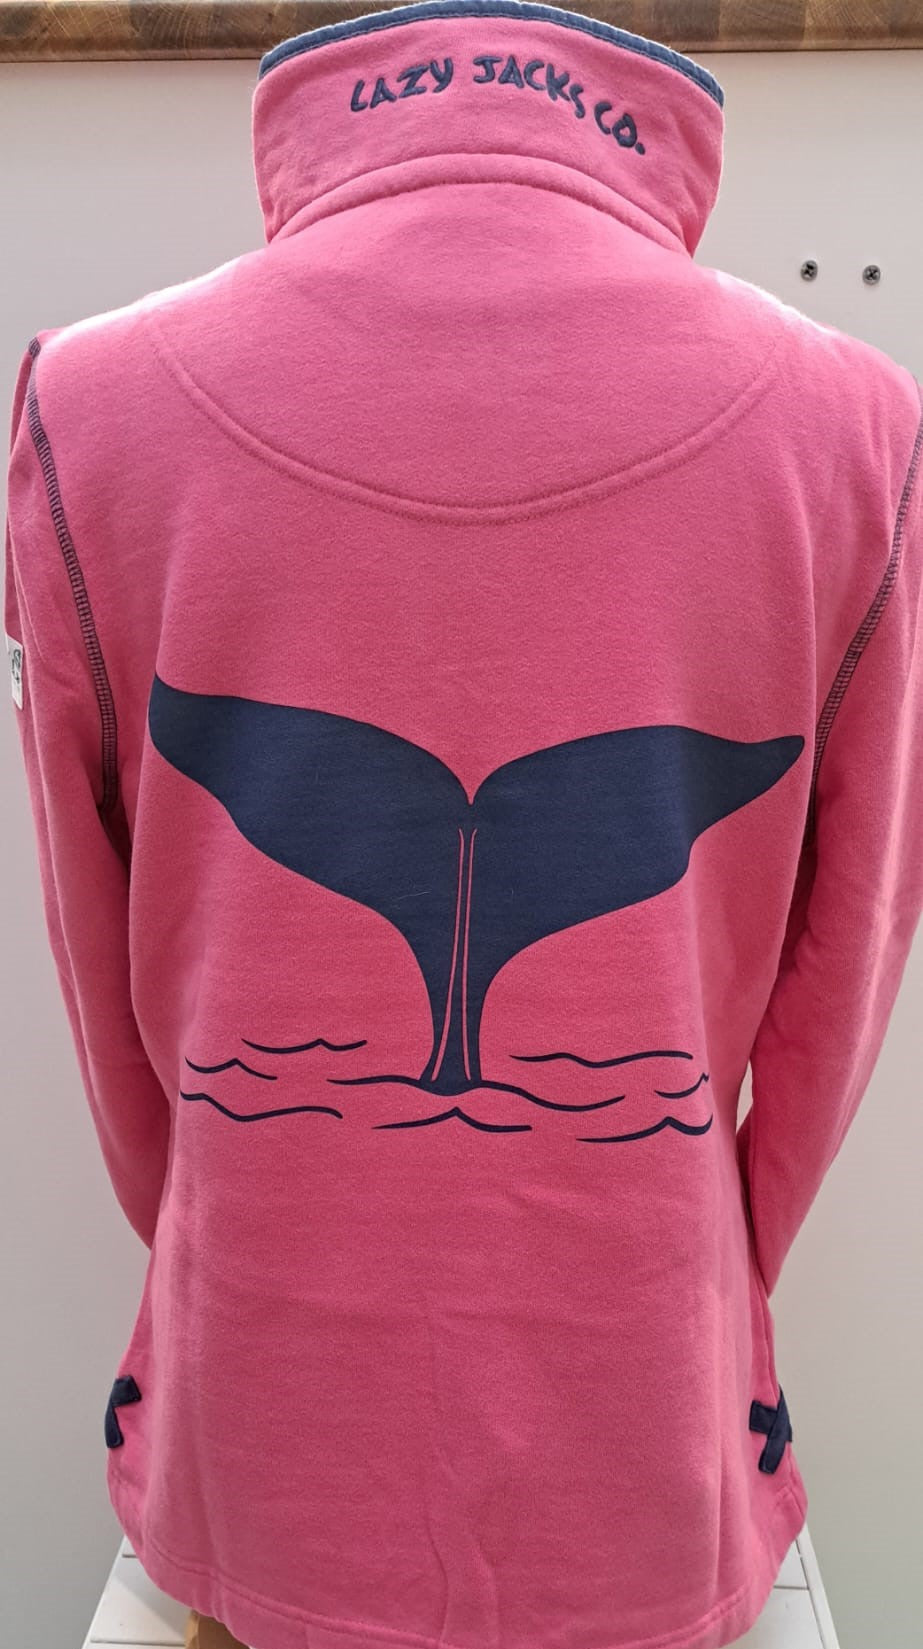 Womens Button Neck Sweat shirt - 'Whitby Yard Whale Tail Design' - Pink